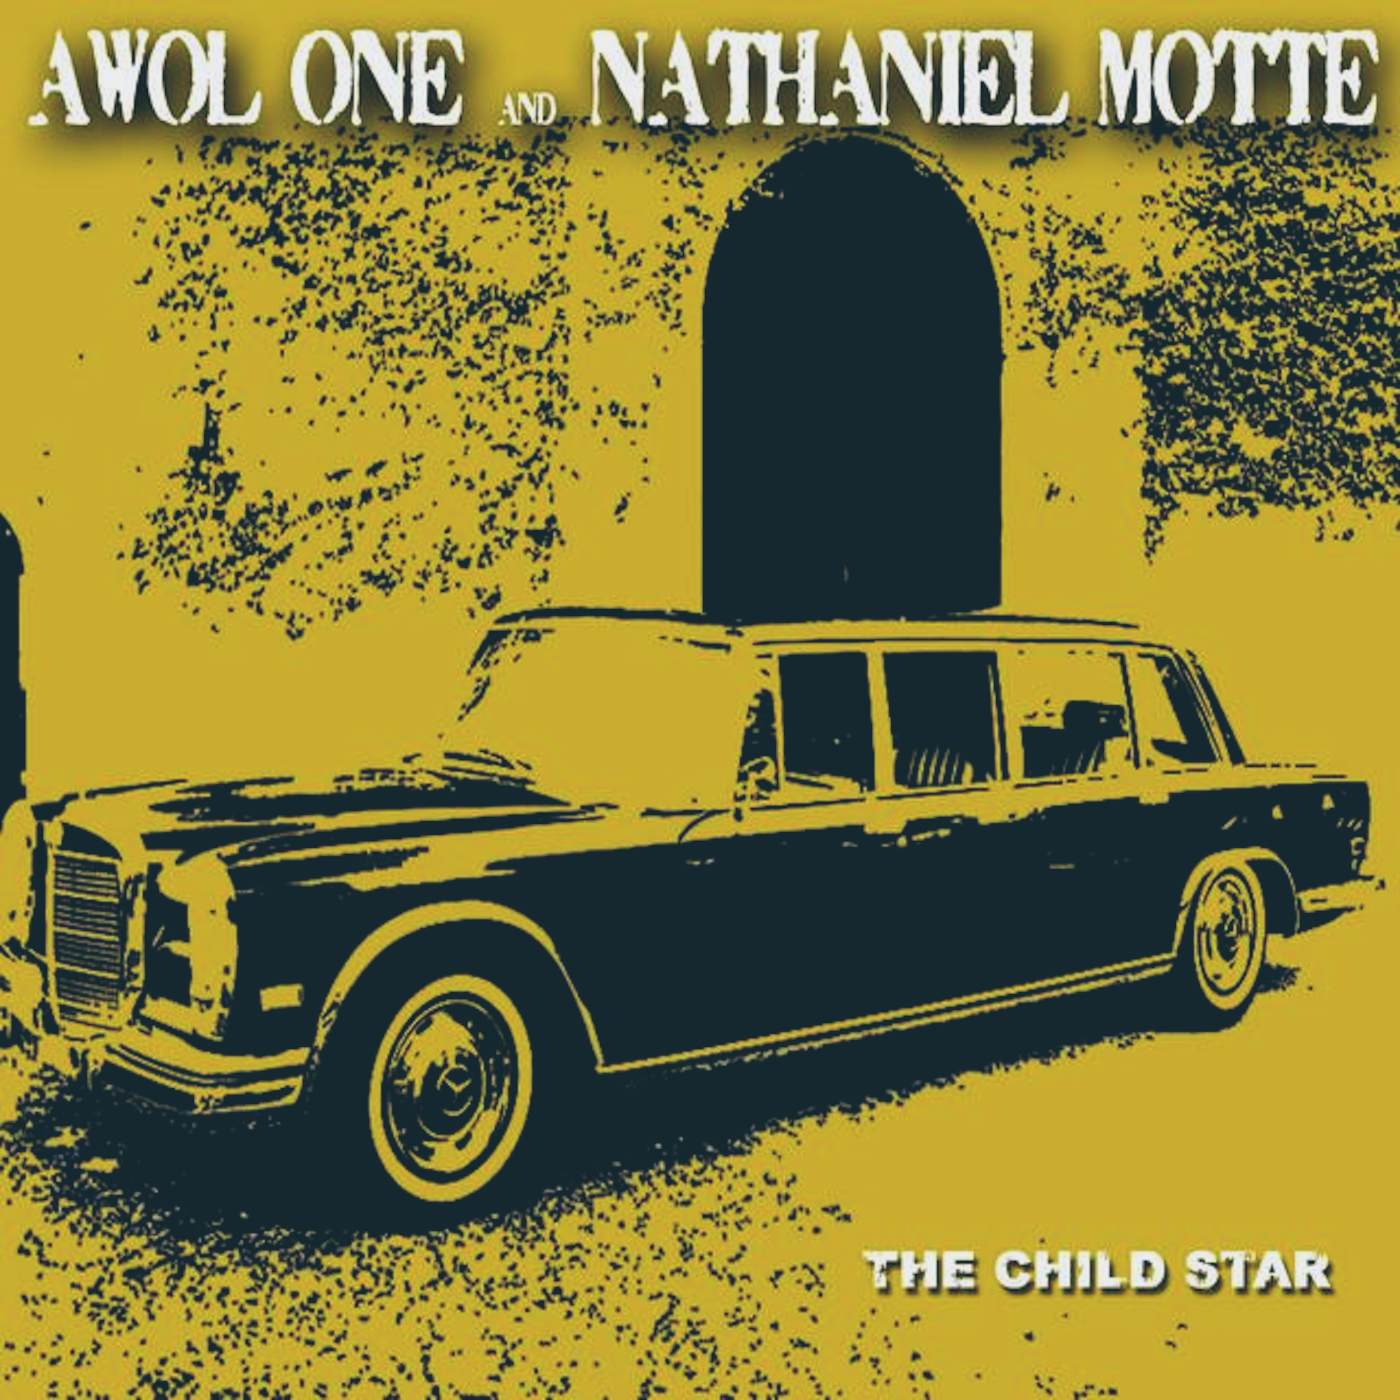 Awol One and Nathaniel Motte